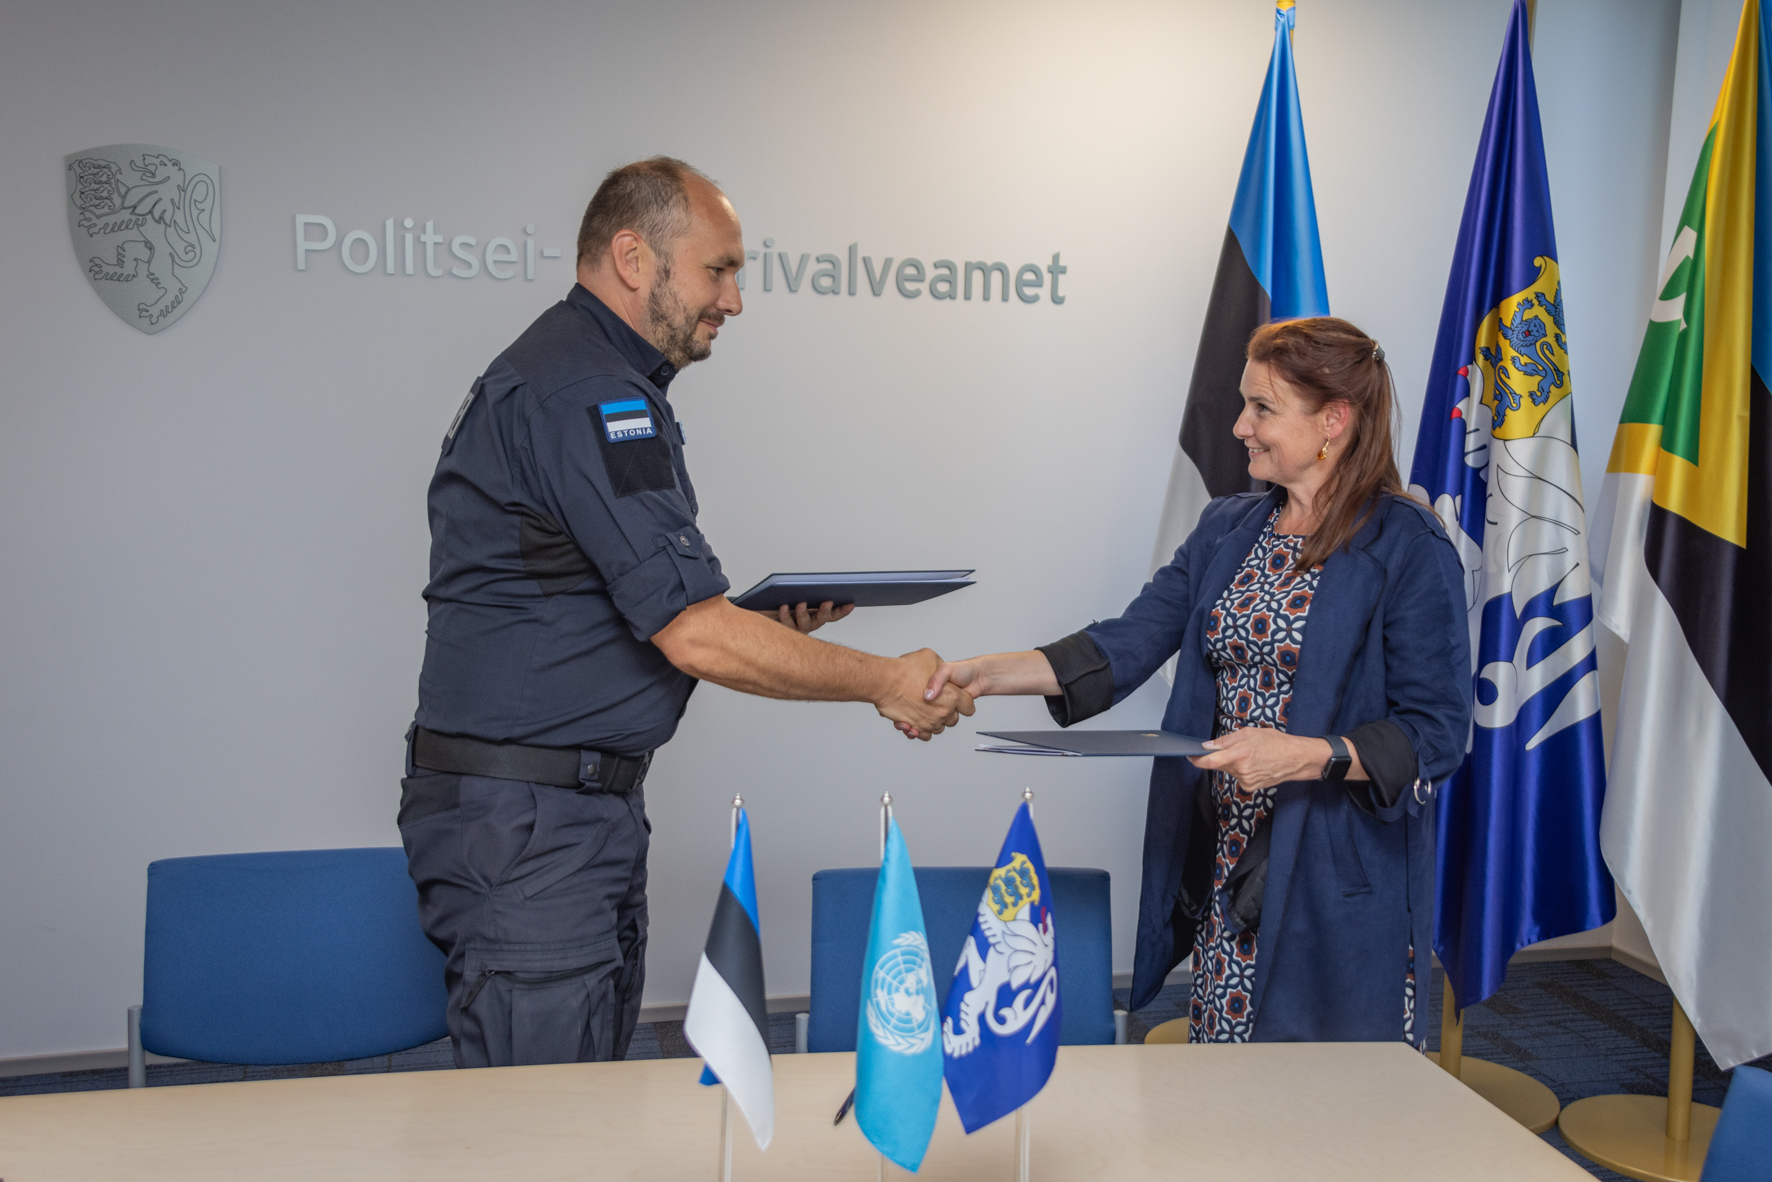 UNHCR working – refugees to Europe and Northern Border Board help UNHCR with Estonian Police Guard